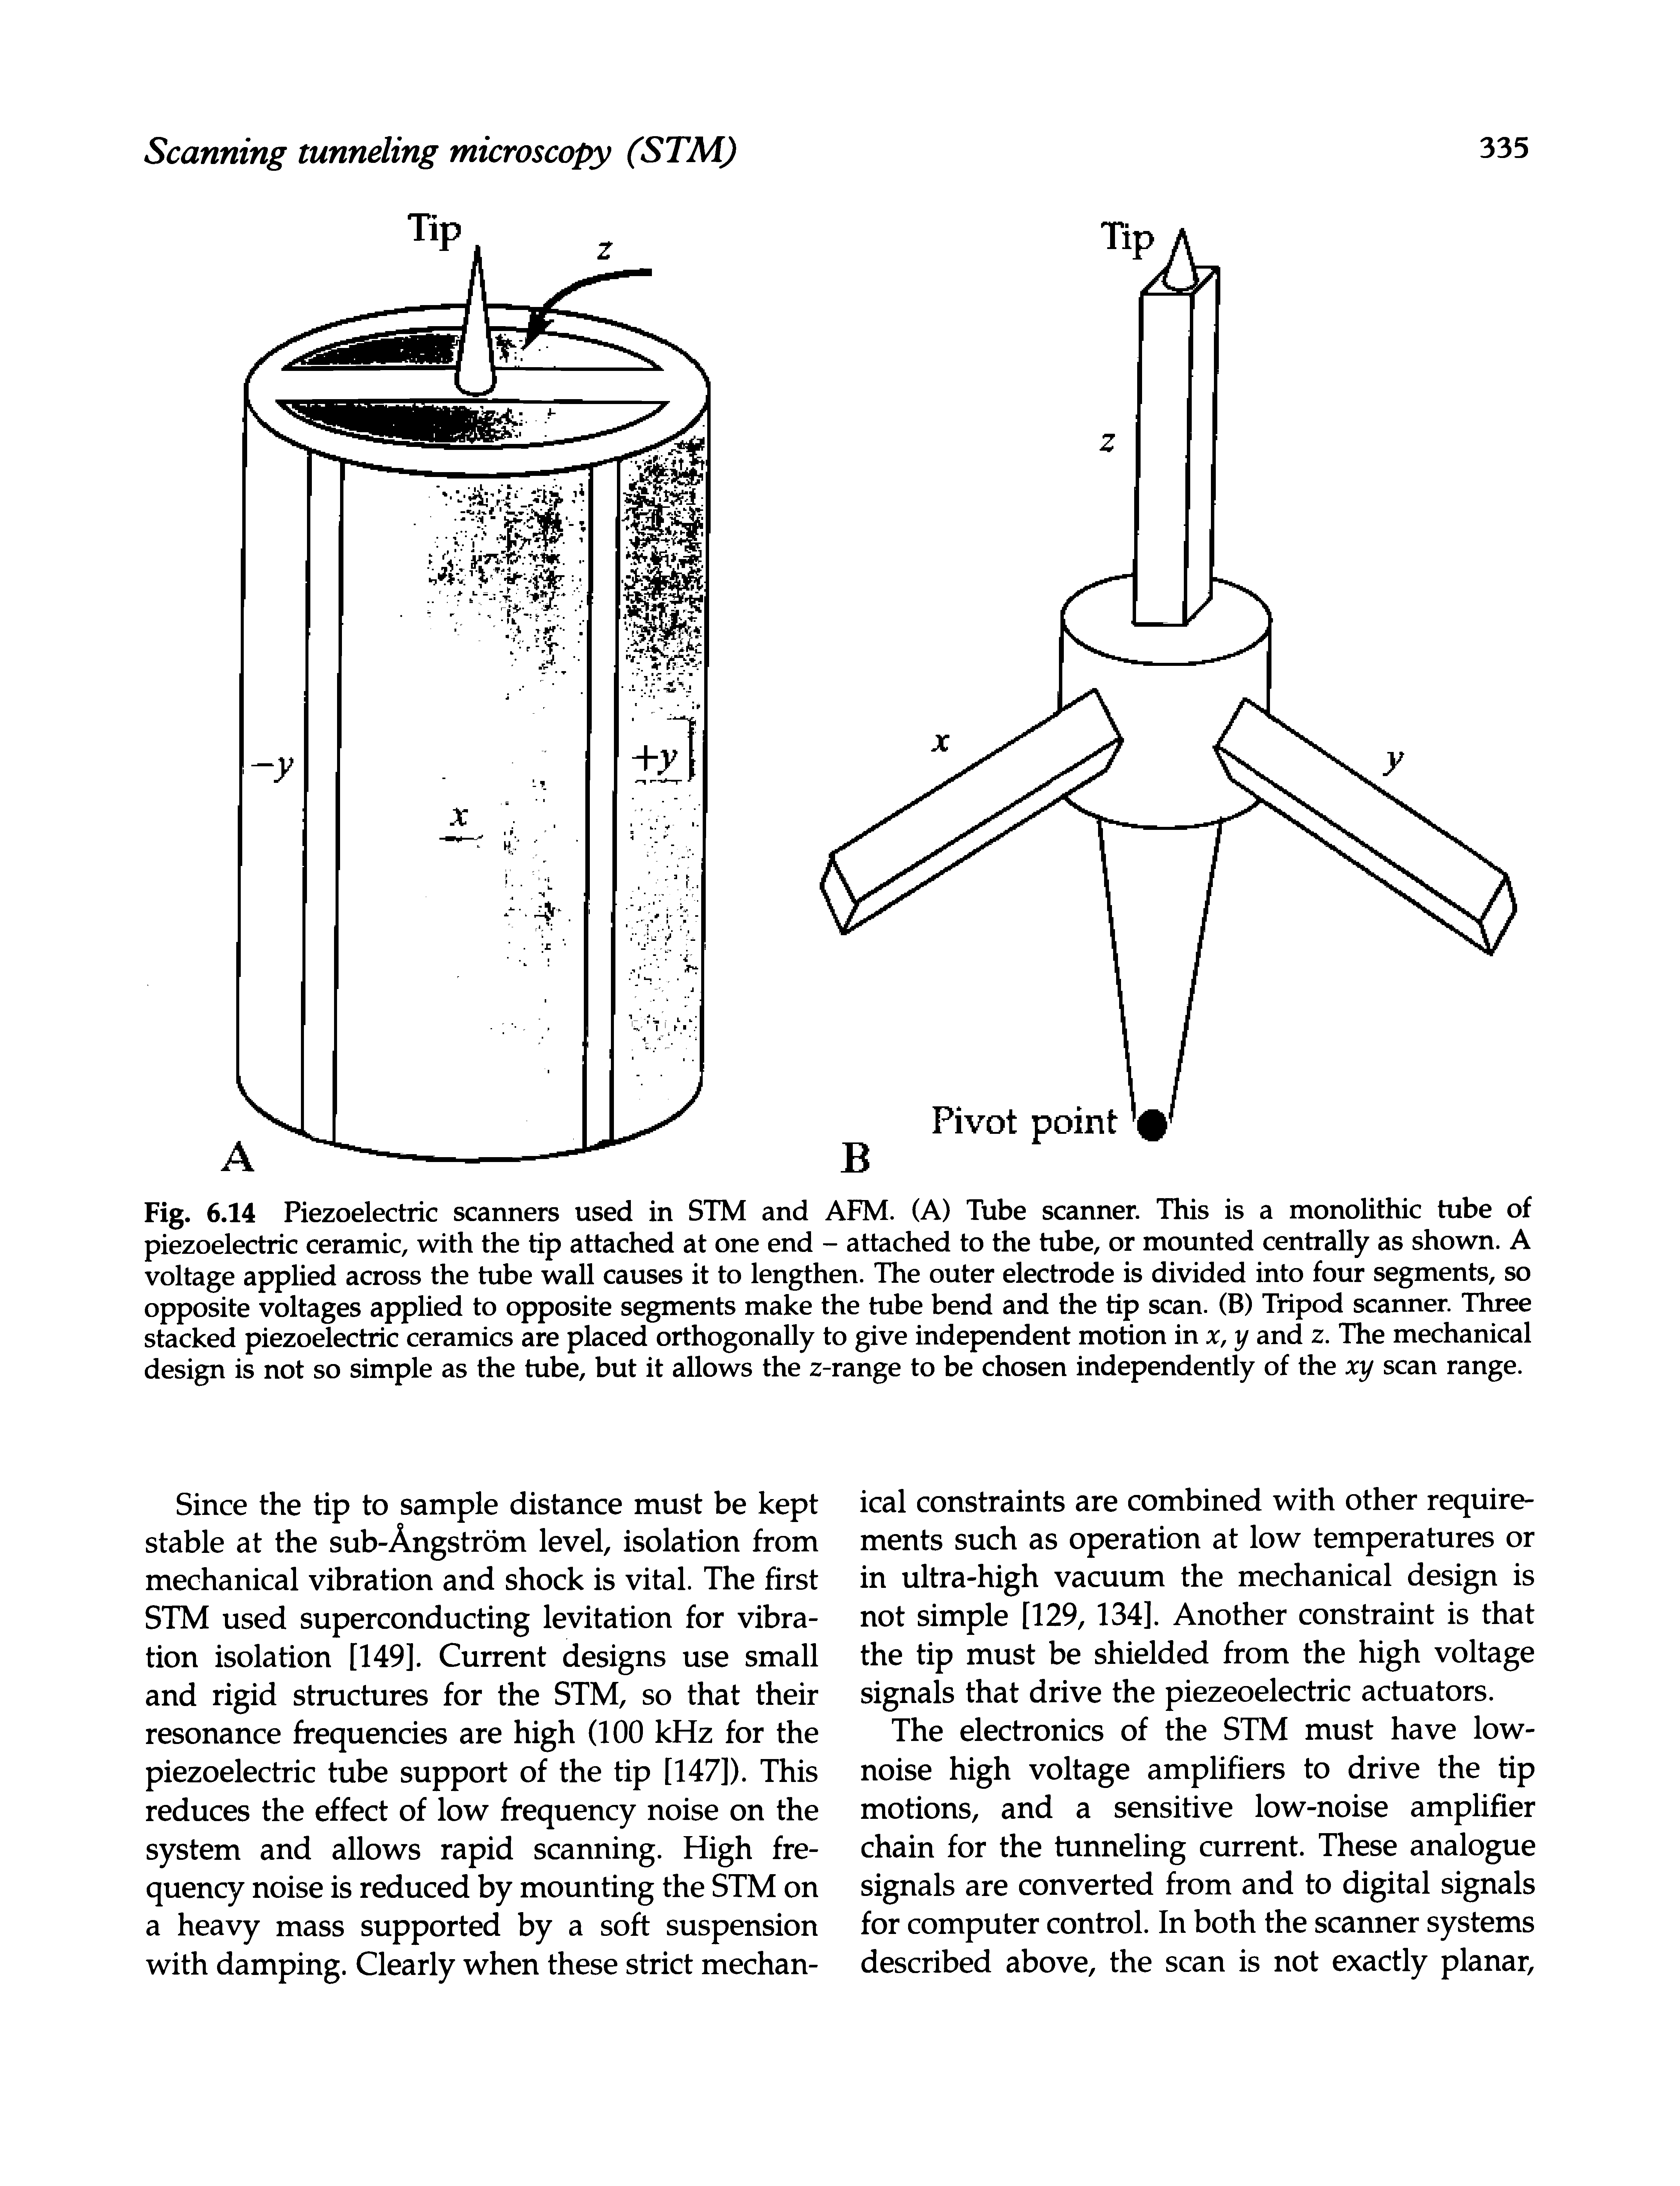 Fig. 6.14 Piezoelectric scanners used in STM and AFM. (A) Tube scanner. This is a monolithic tube of piezoelectric ceramic, with the tip attached at one end - attached to the tube, or mounted centrally as shown. A voltage applied across the tube wall causes it to lengthen. The outer electrode is divided into four segments, so opposite voltages applied to opposite segments make the tube bend and the tip scan. (B) Tripod scanner. Three stacked piezoelectric ceramics are placed orthogonally to give independent motion in x, y and z. The mechanical design is not so simple as the tube, but it allows the z-range to be chosen independently of the xy scan range.